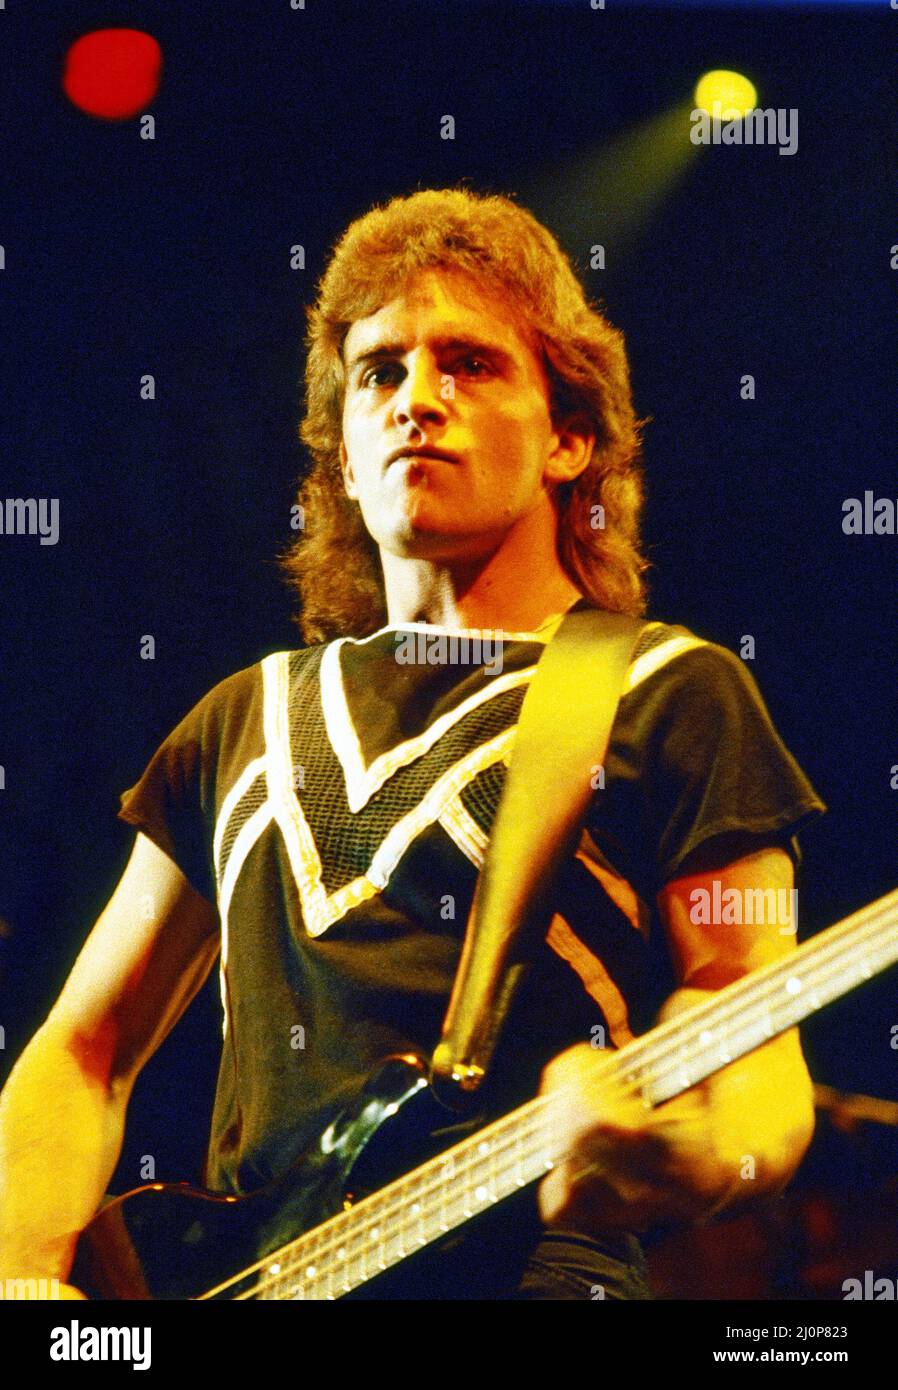 Canadian rock band Saga in concert at Hammersmith Odeon. Pictured, Jim Crichton. 10th November 1983. Stock Photo